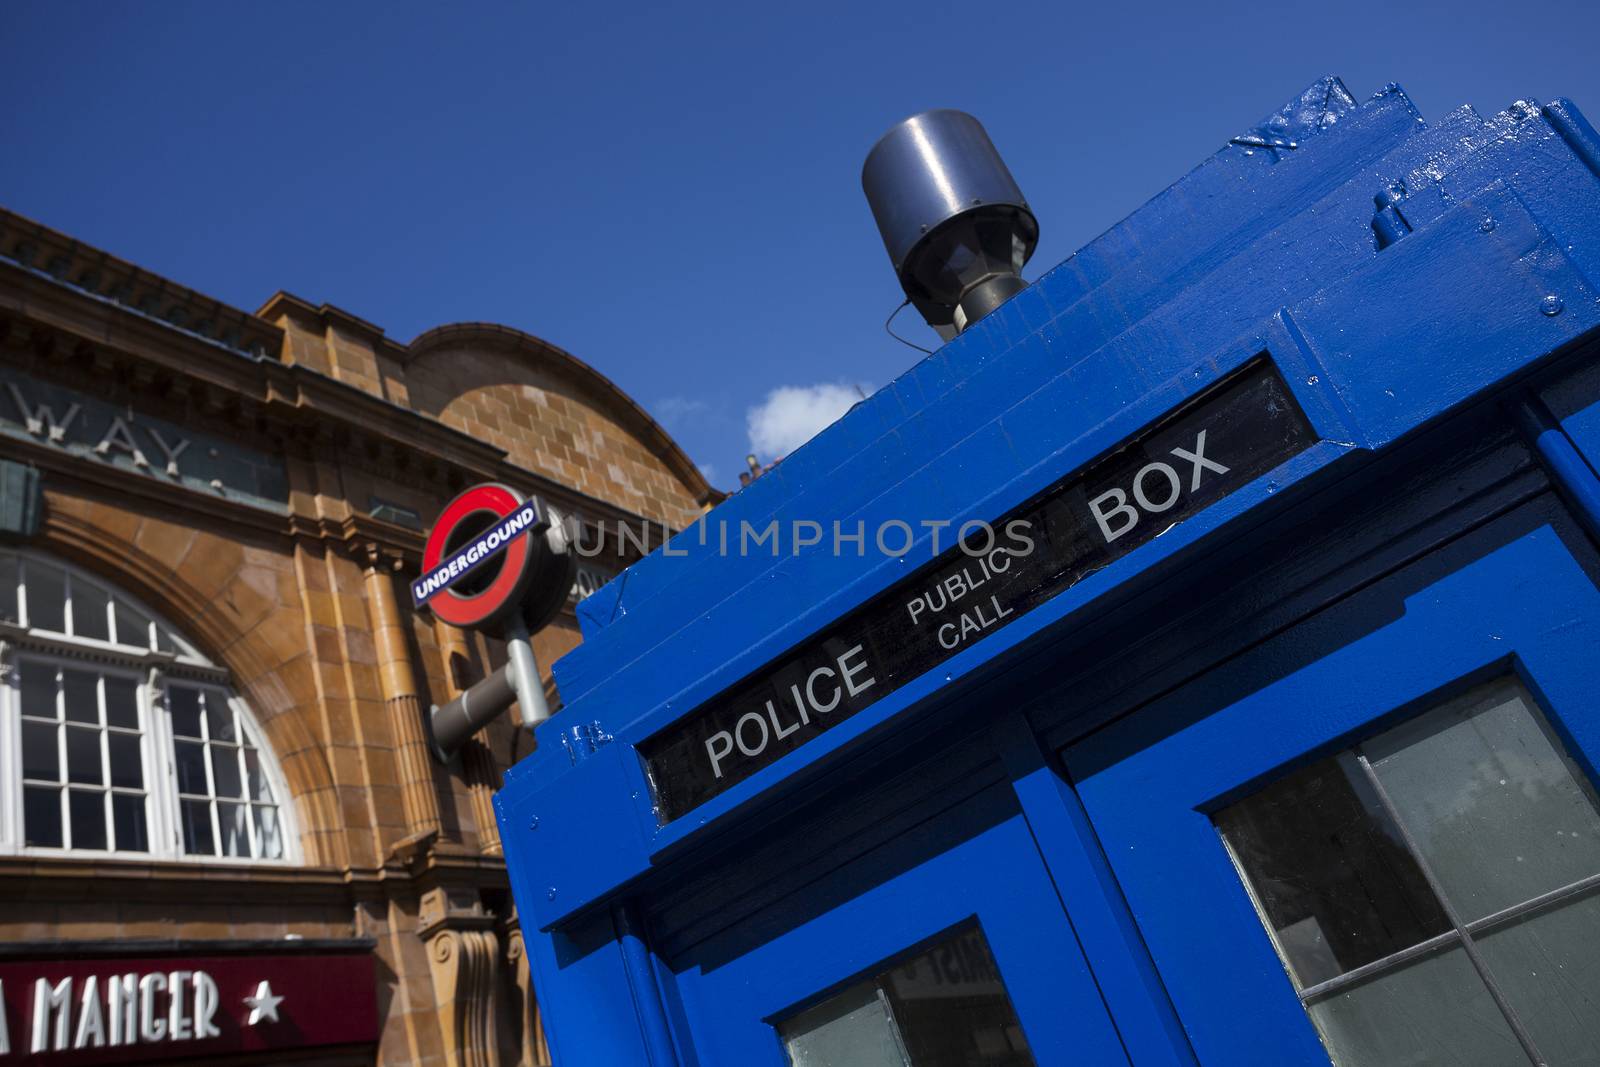 LONDON - JUNE 11, 2014: Public call police box with mounted a modern surveillance camera near Earl's Court tube station in London.